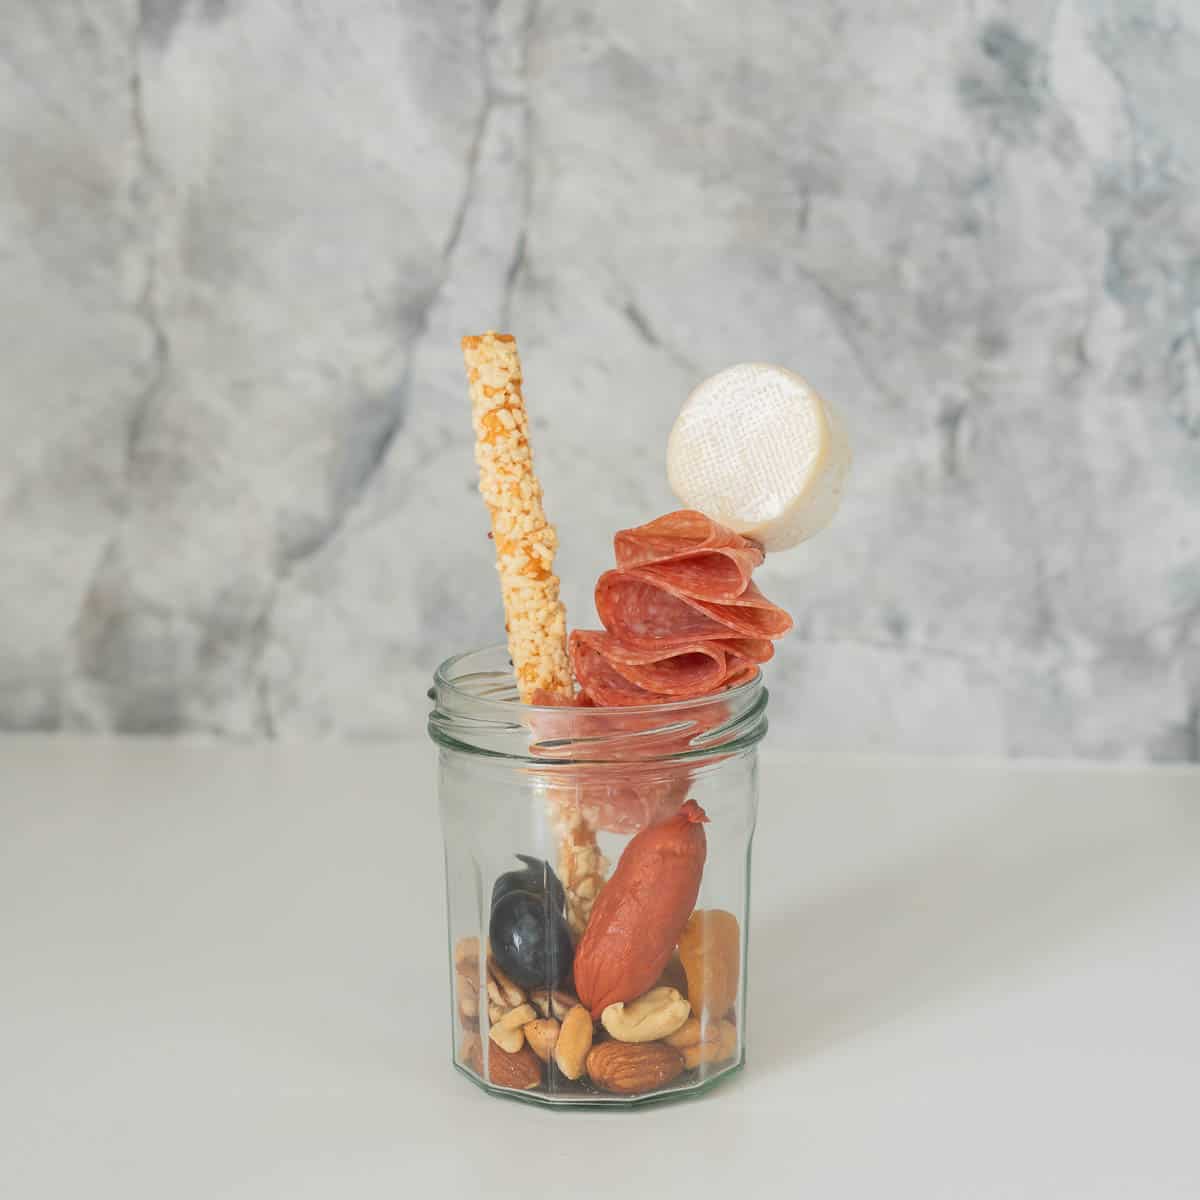 A small jar, one quarter filled with nuts and dried apricots, a bread stick and cheese on a skewer poking up and out of the jar.